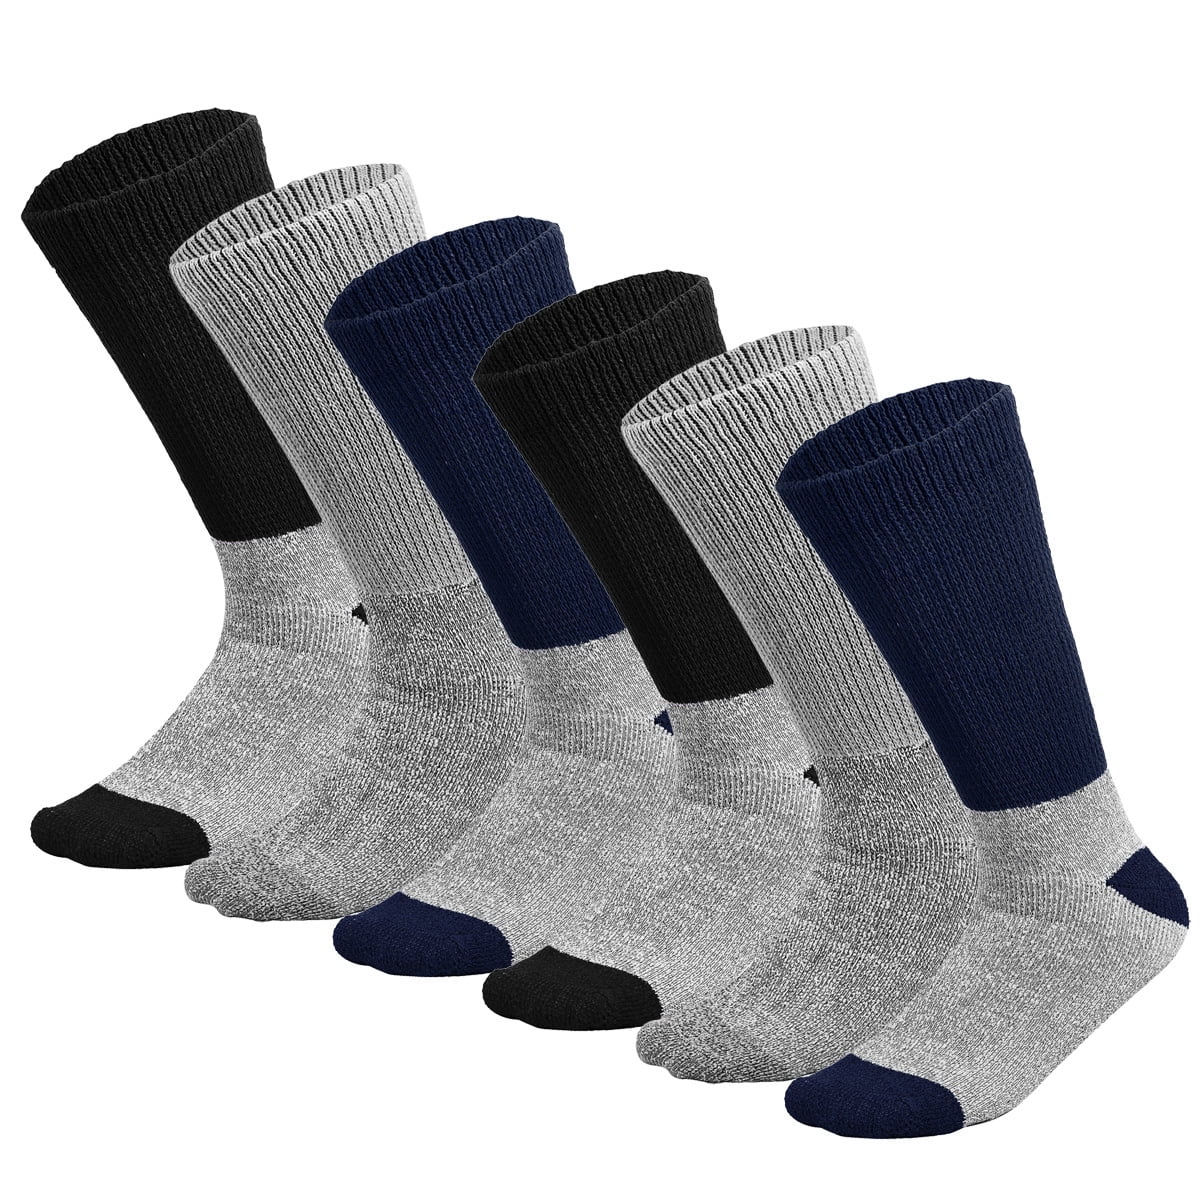 Clothes, Shoes & Accessories Mens Diabetic Socks 1 Pair Thermal 2.4 Tog ...